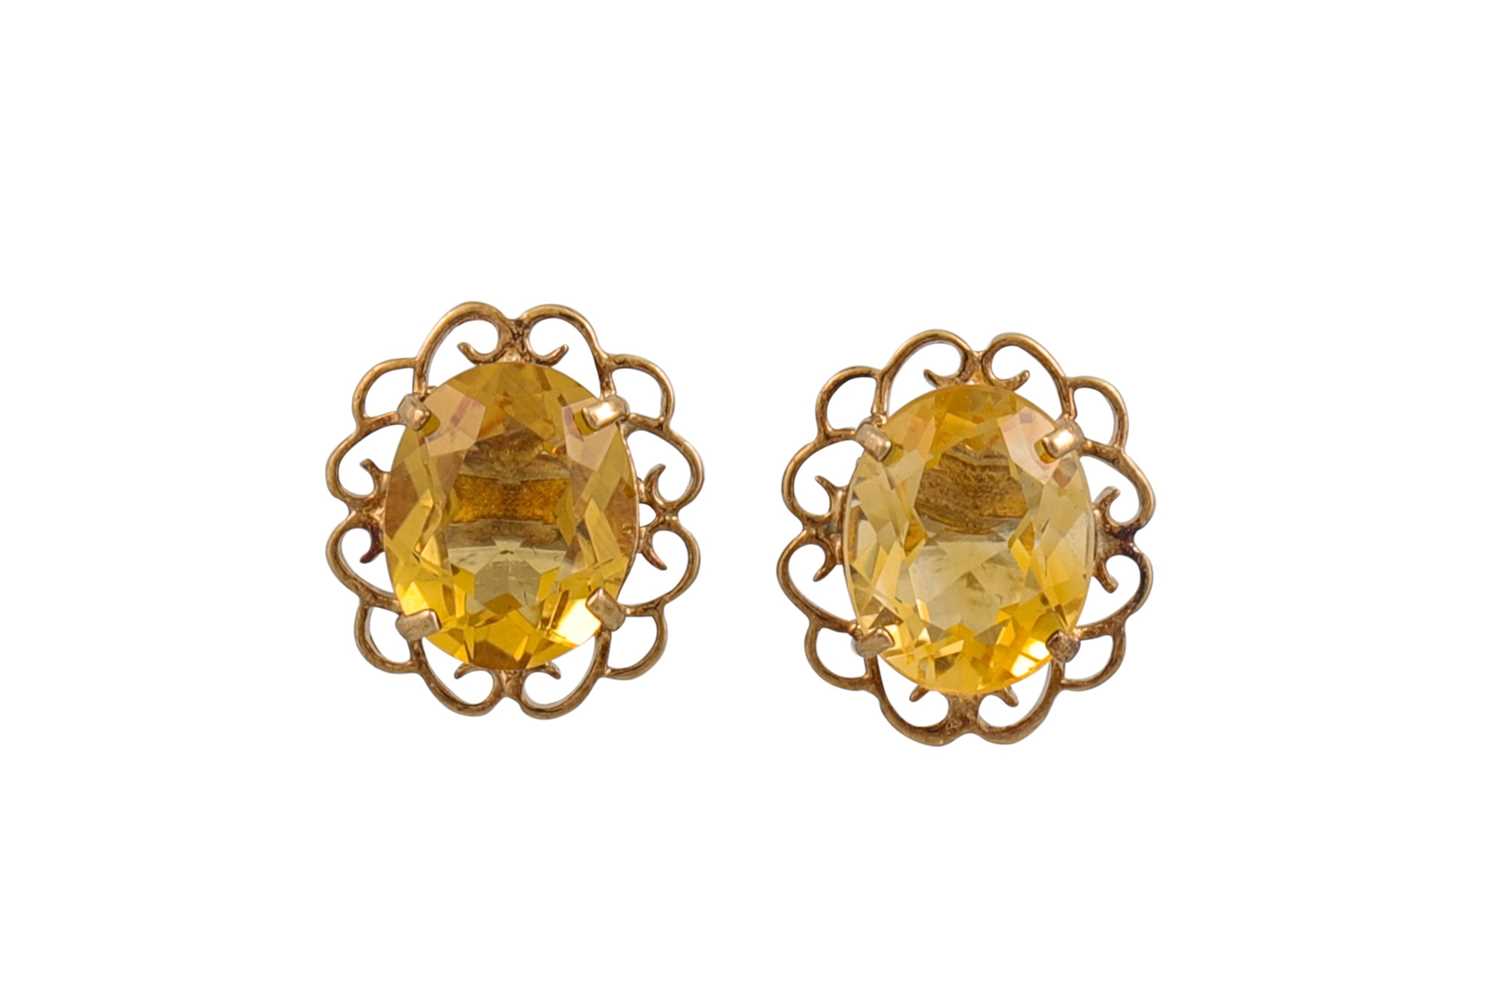 Lot 123 - A PAIR OF LARGE CITRINE EARRINGS, mounted in gold